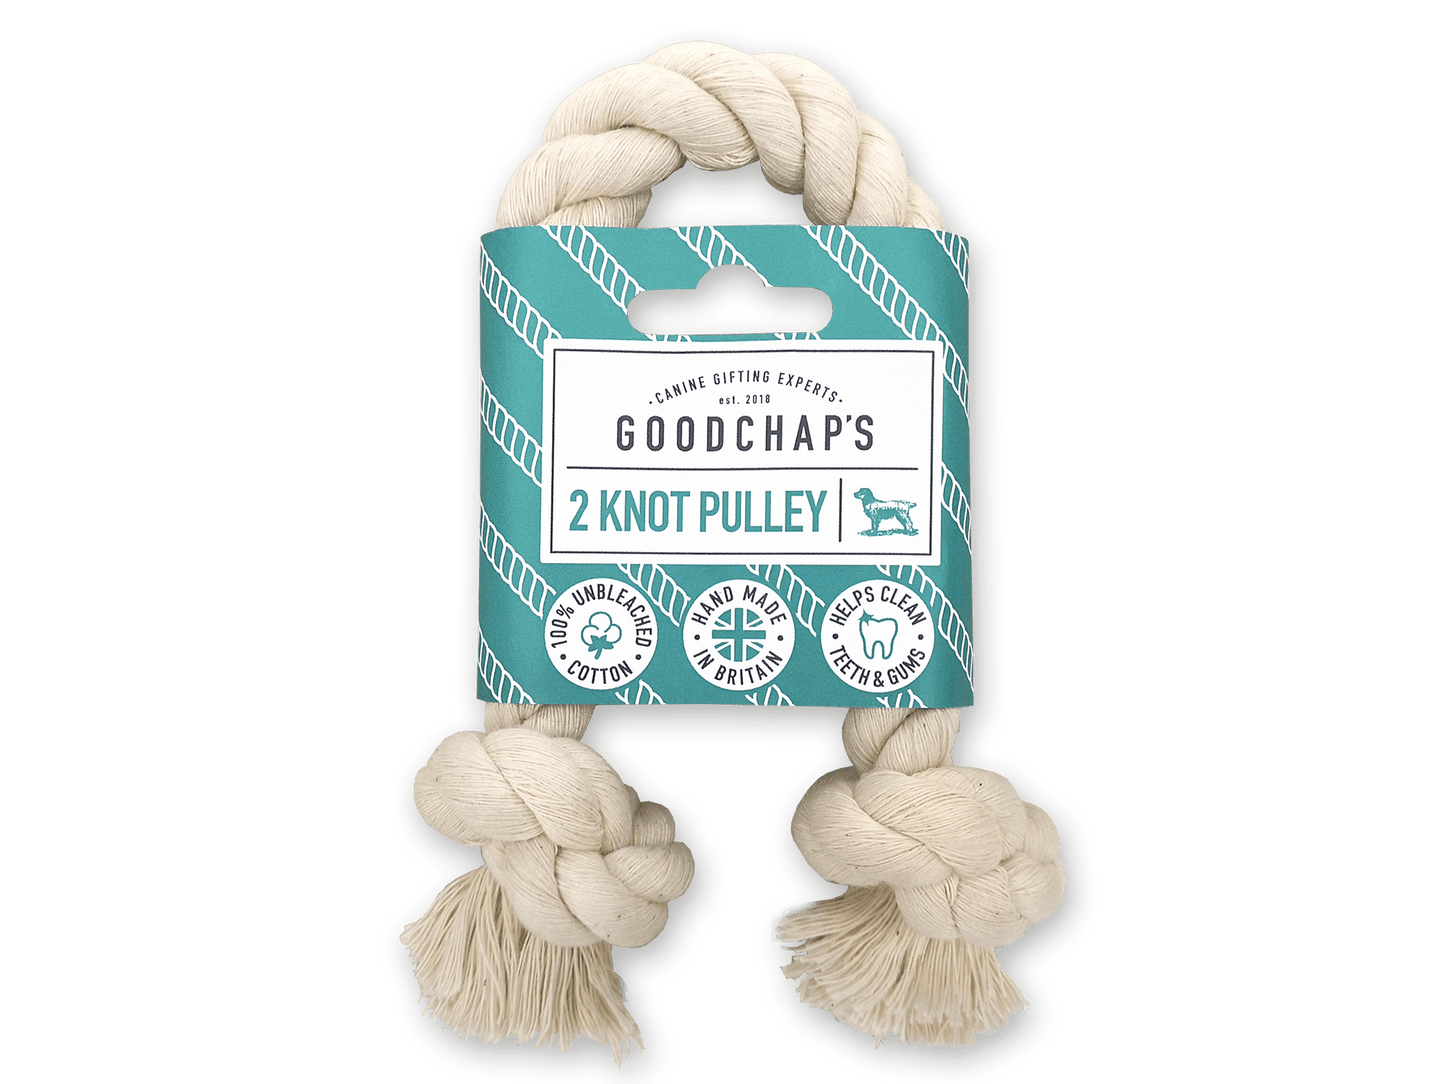 Goodchaps 2 Knot Pulley